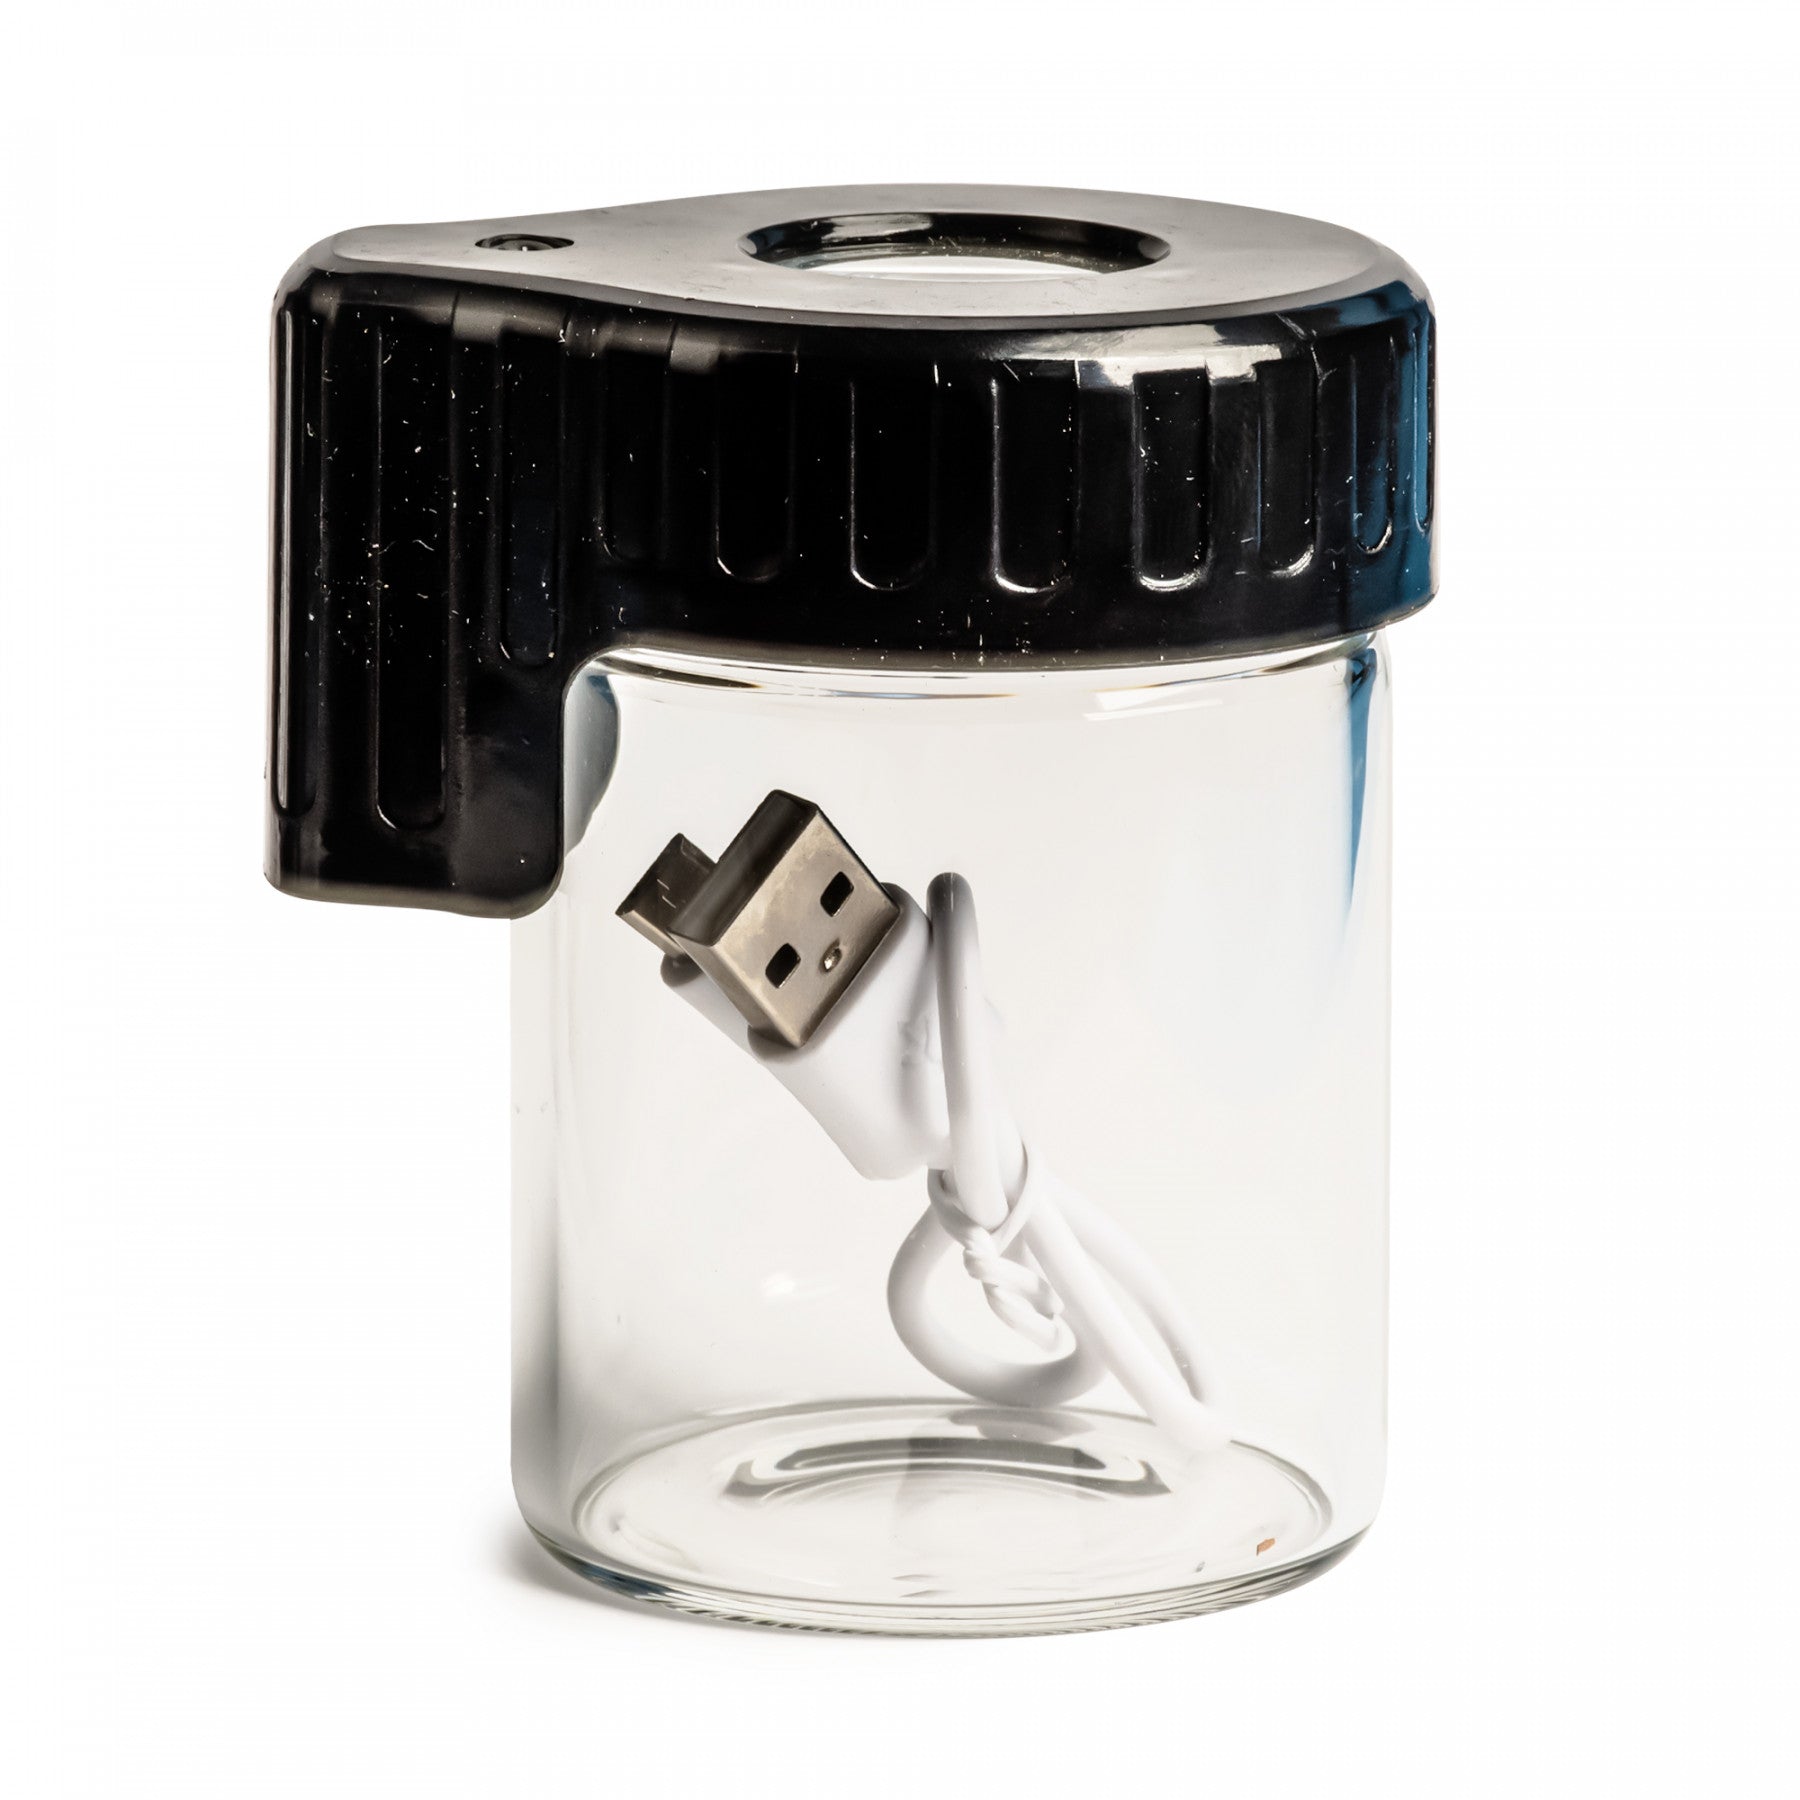 Black Cookies Light Up Glass Storage Jar with Magnifying Viewing Top. Vancouver, Canada